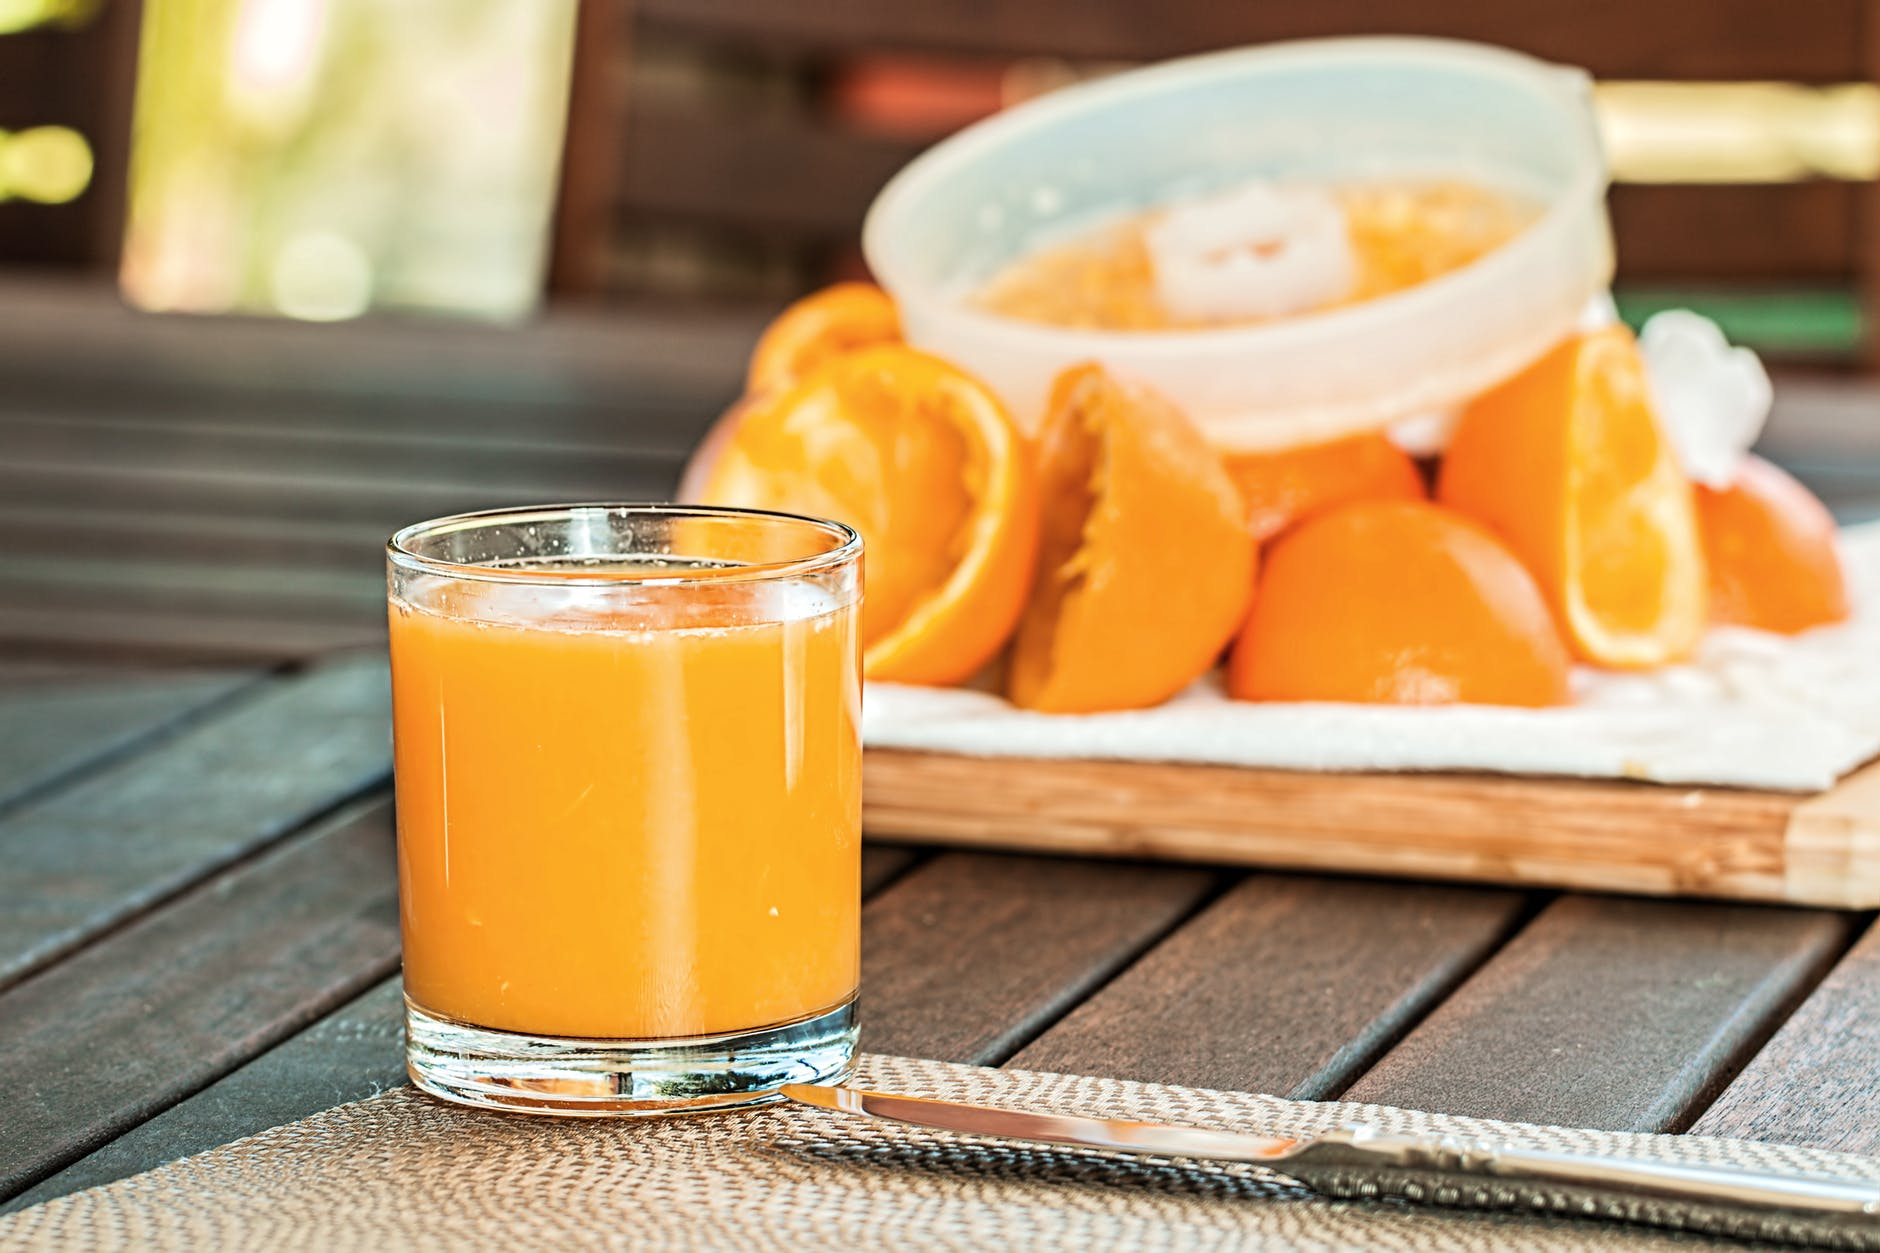 An image of orange juice. In this context, “juice” is the influence you need to get things done.